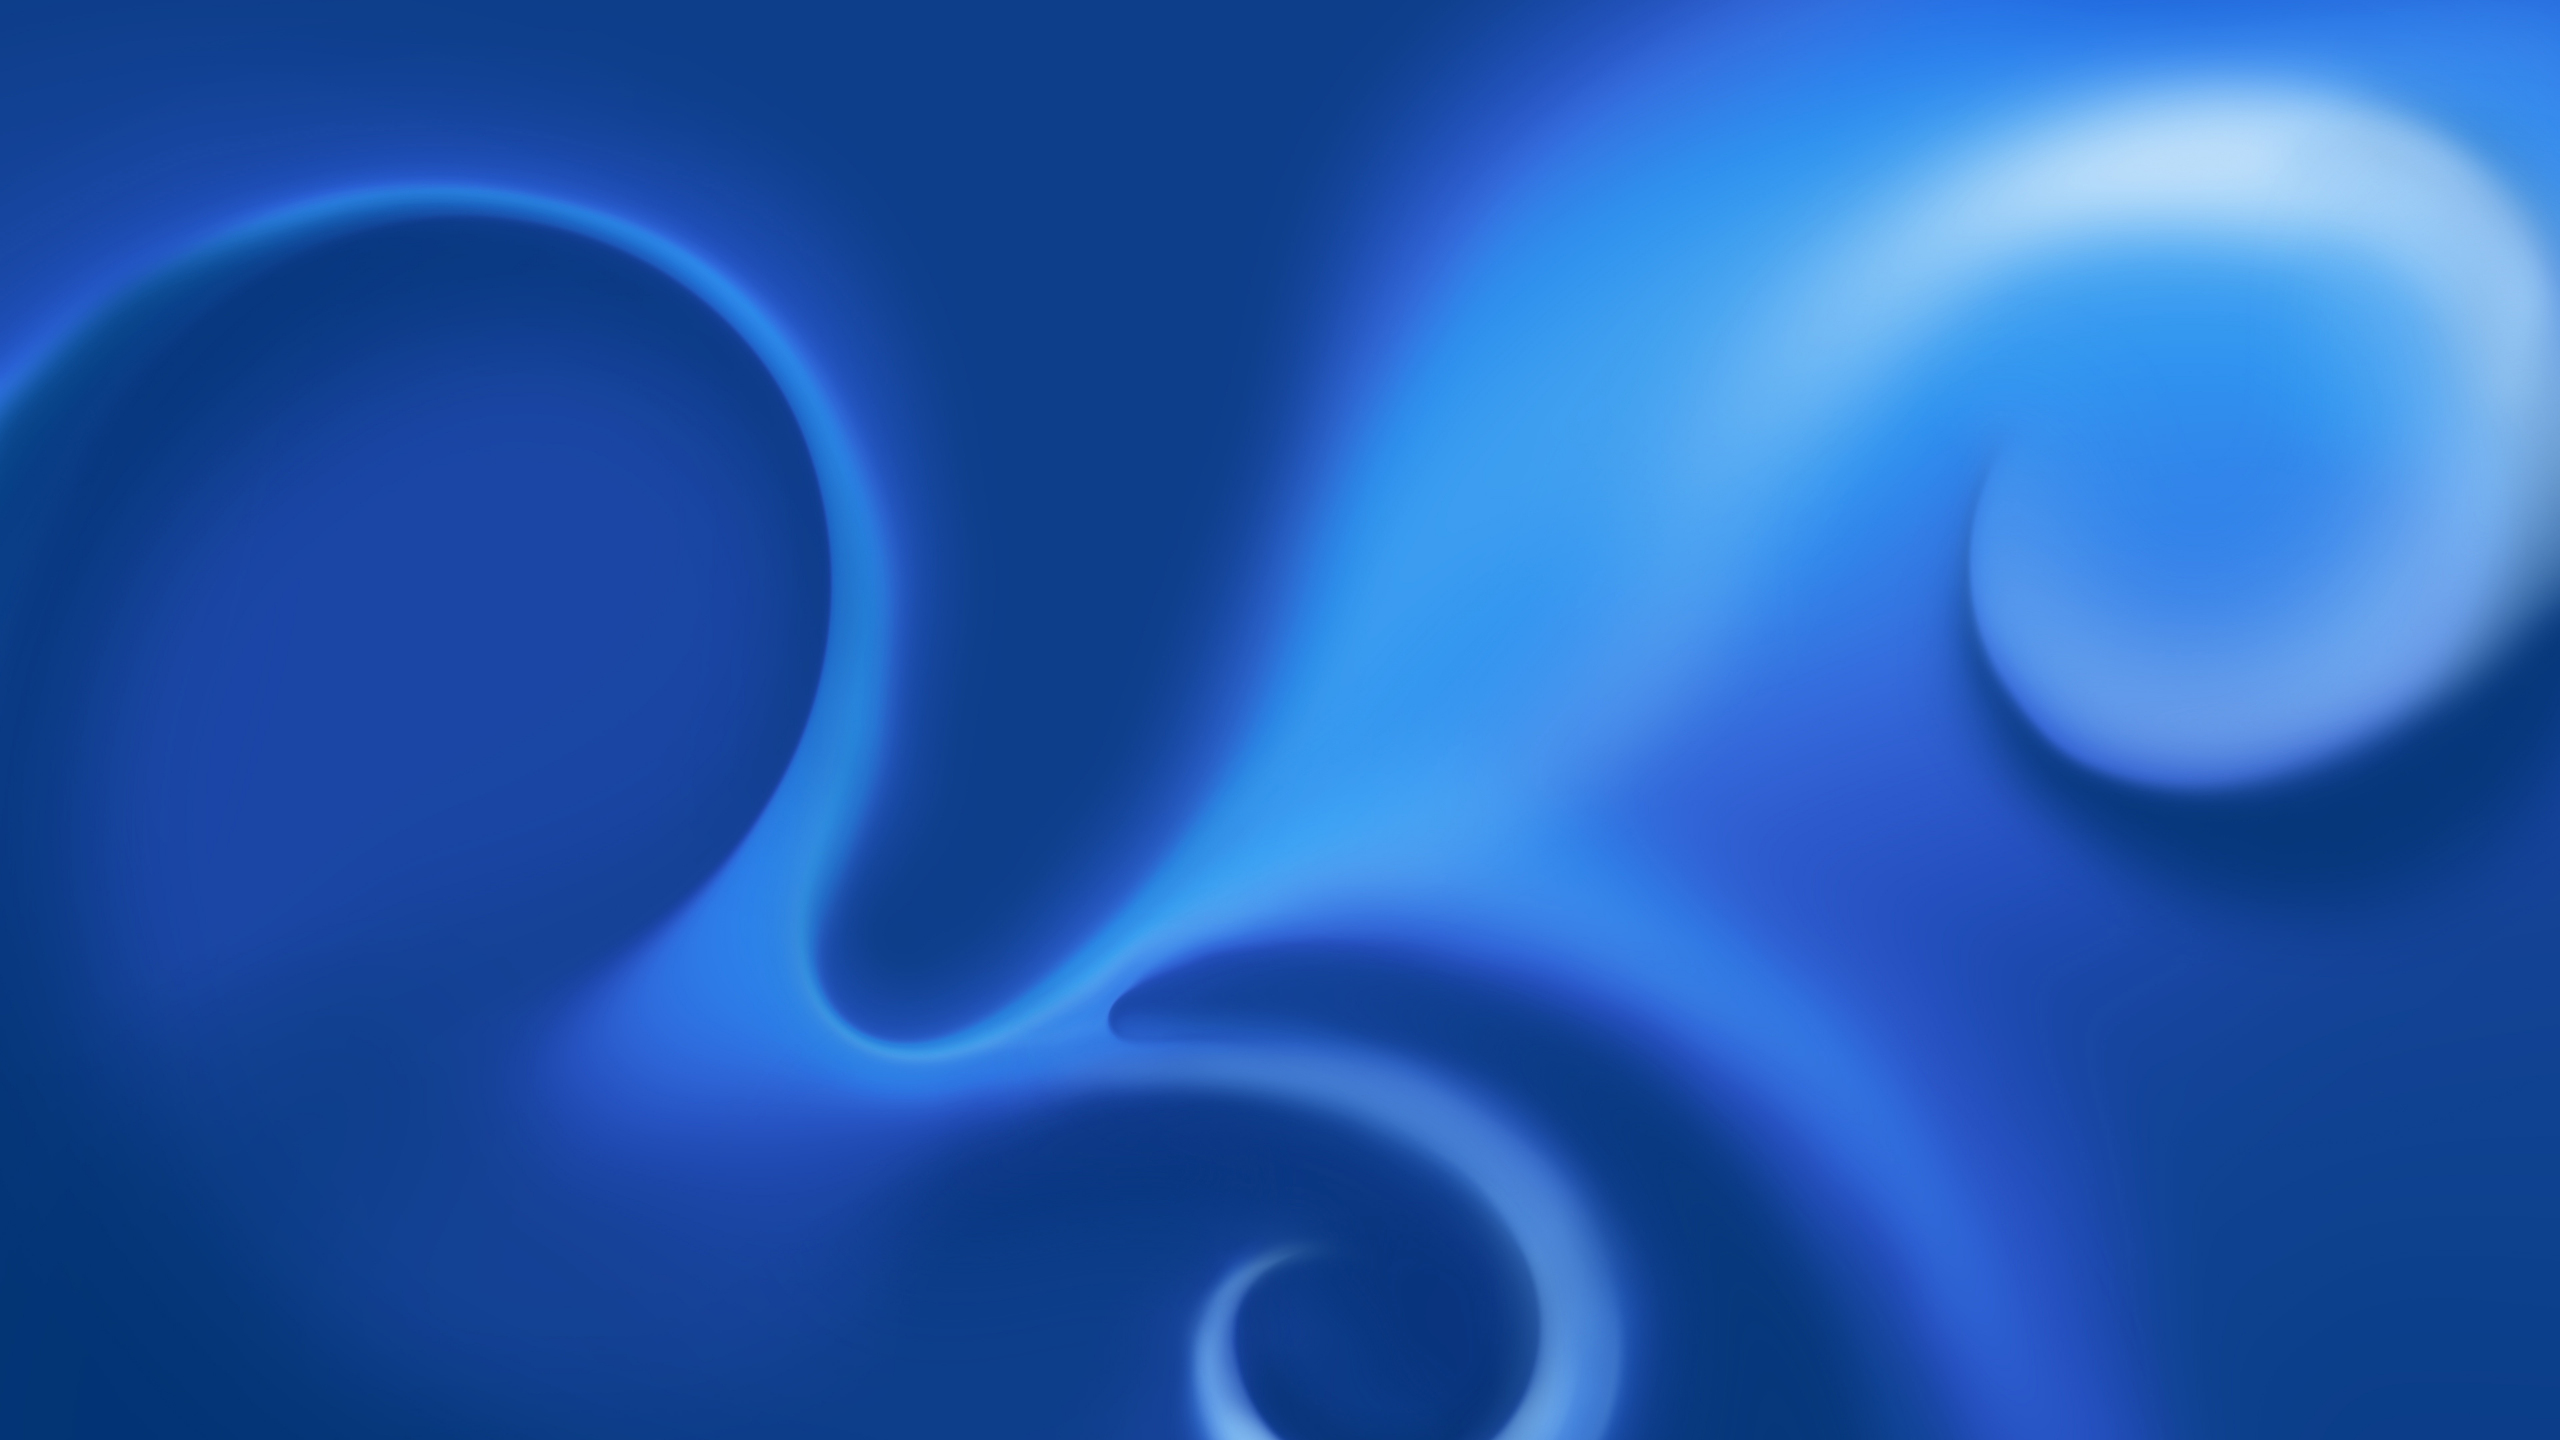 Download Wallpaper 2560x1440 Blue Curves Surface Abstract Dual Wide 16 9 2560x1440 Hd Background